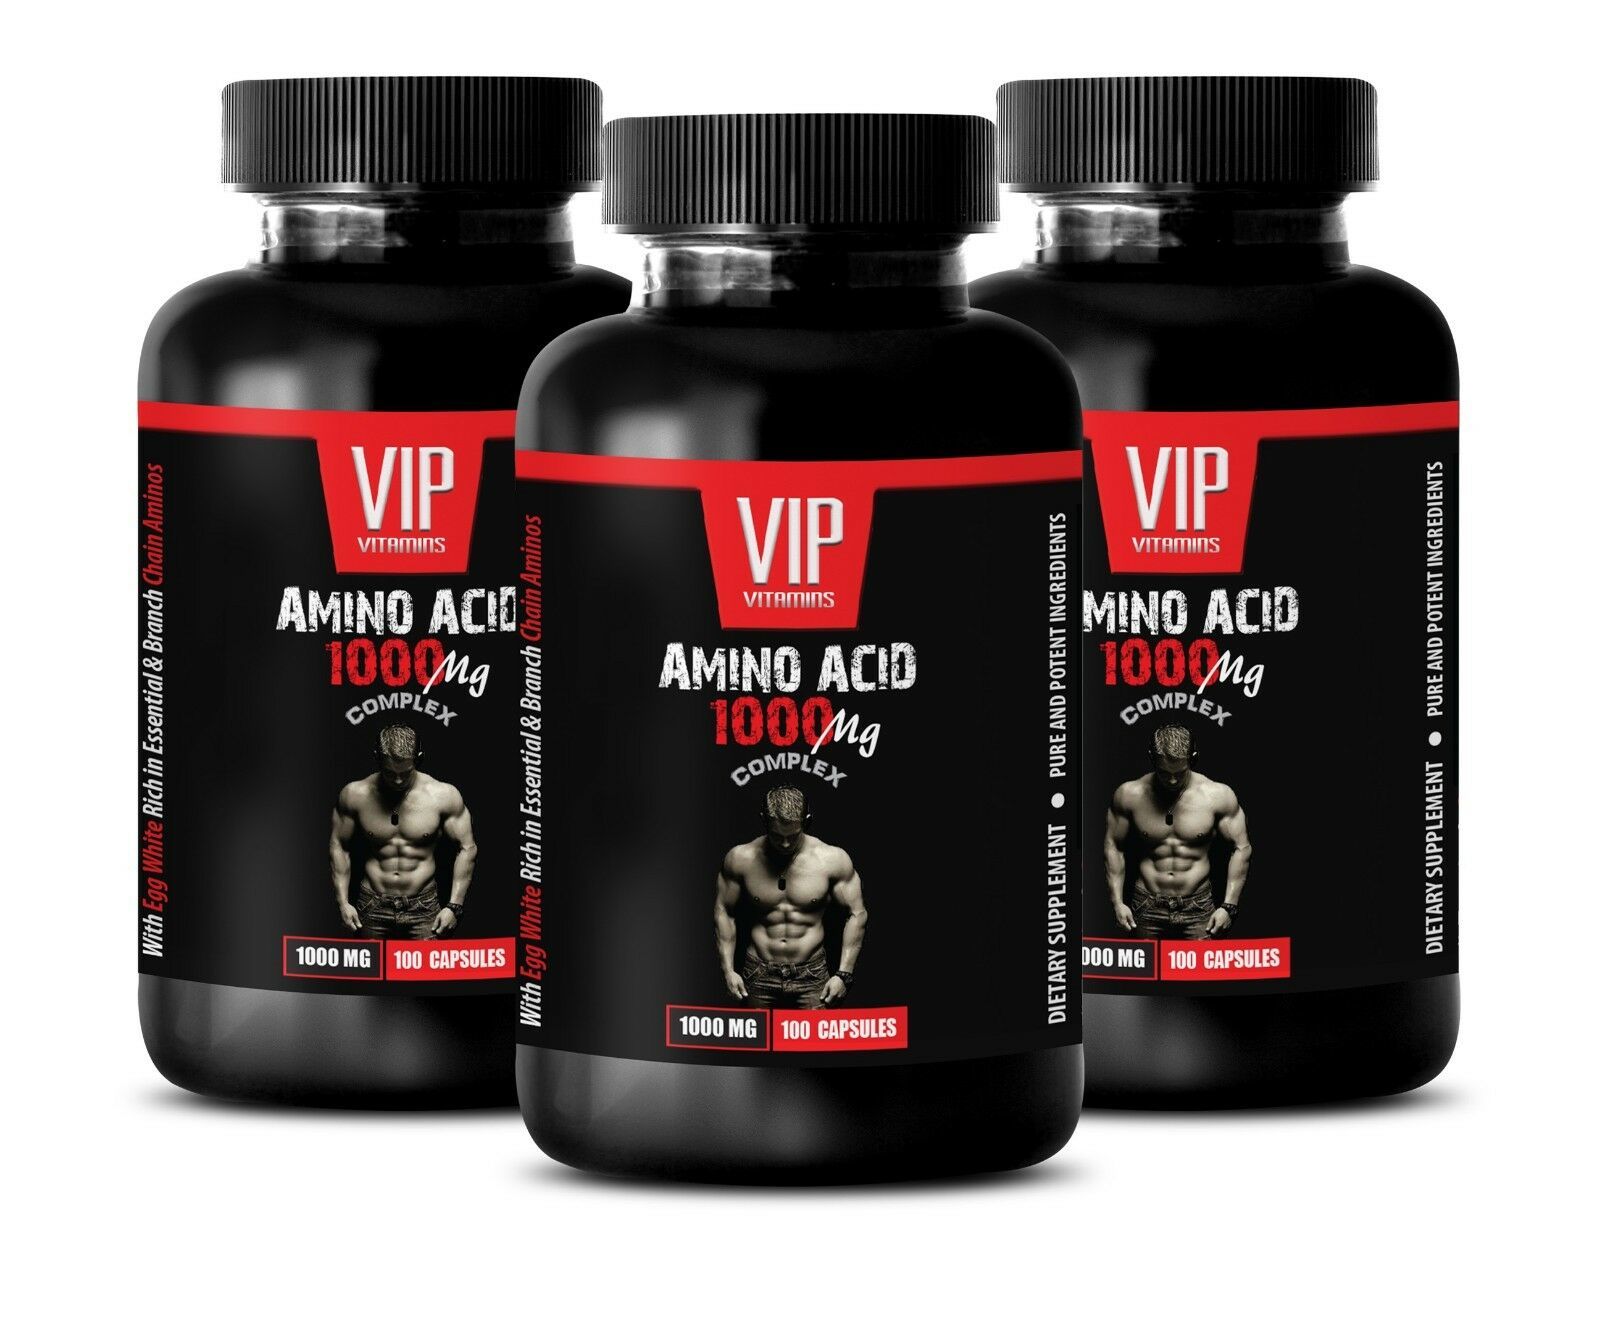 essential amino acids - AMINO ACID 1000mg - boost recovery post workout 3 Bottle - $42.03